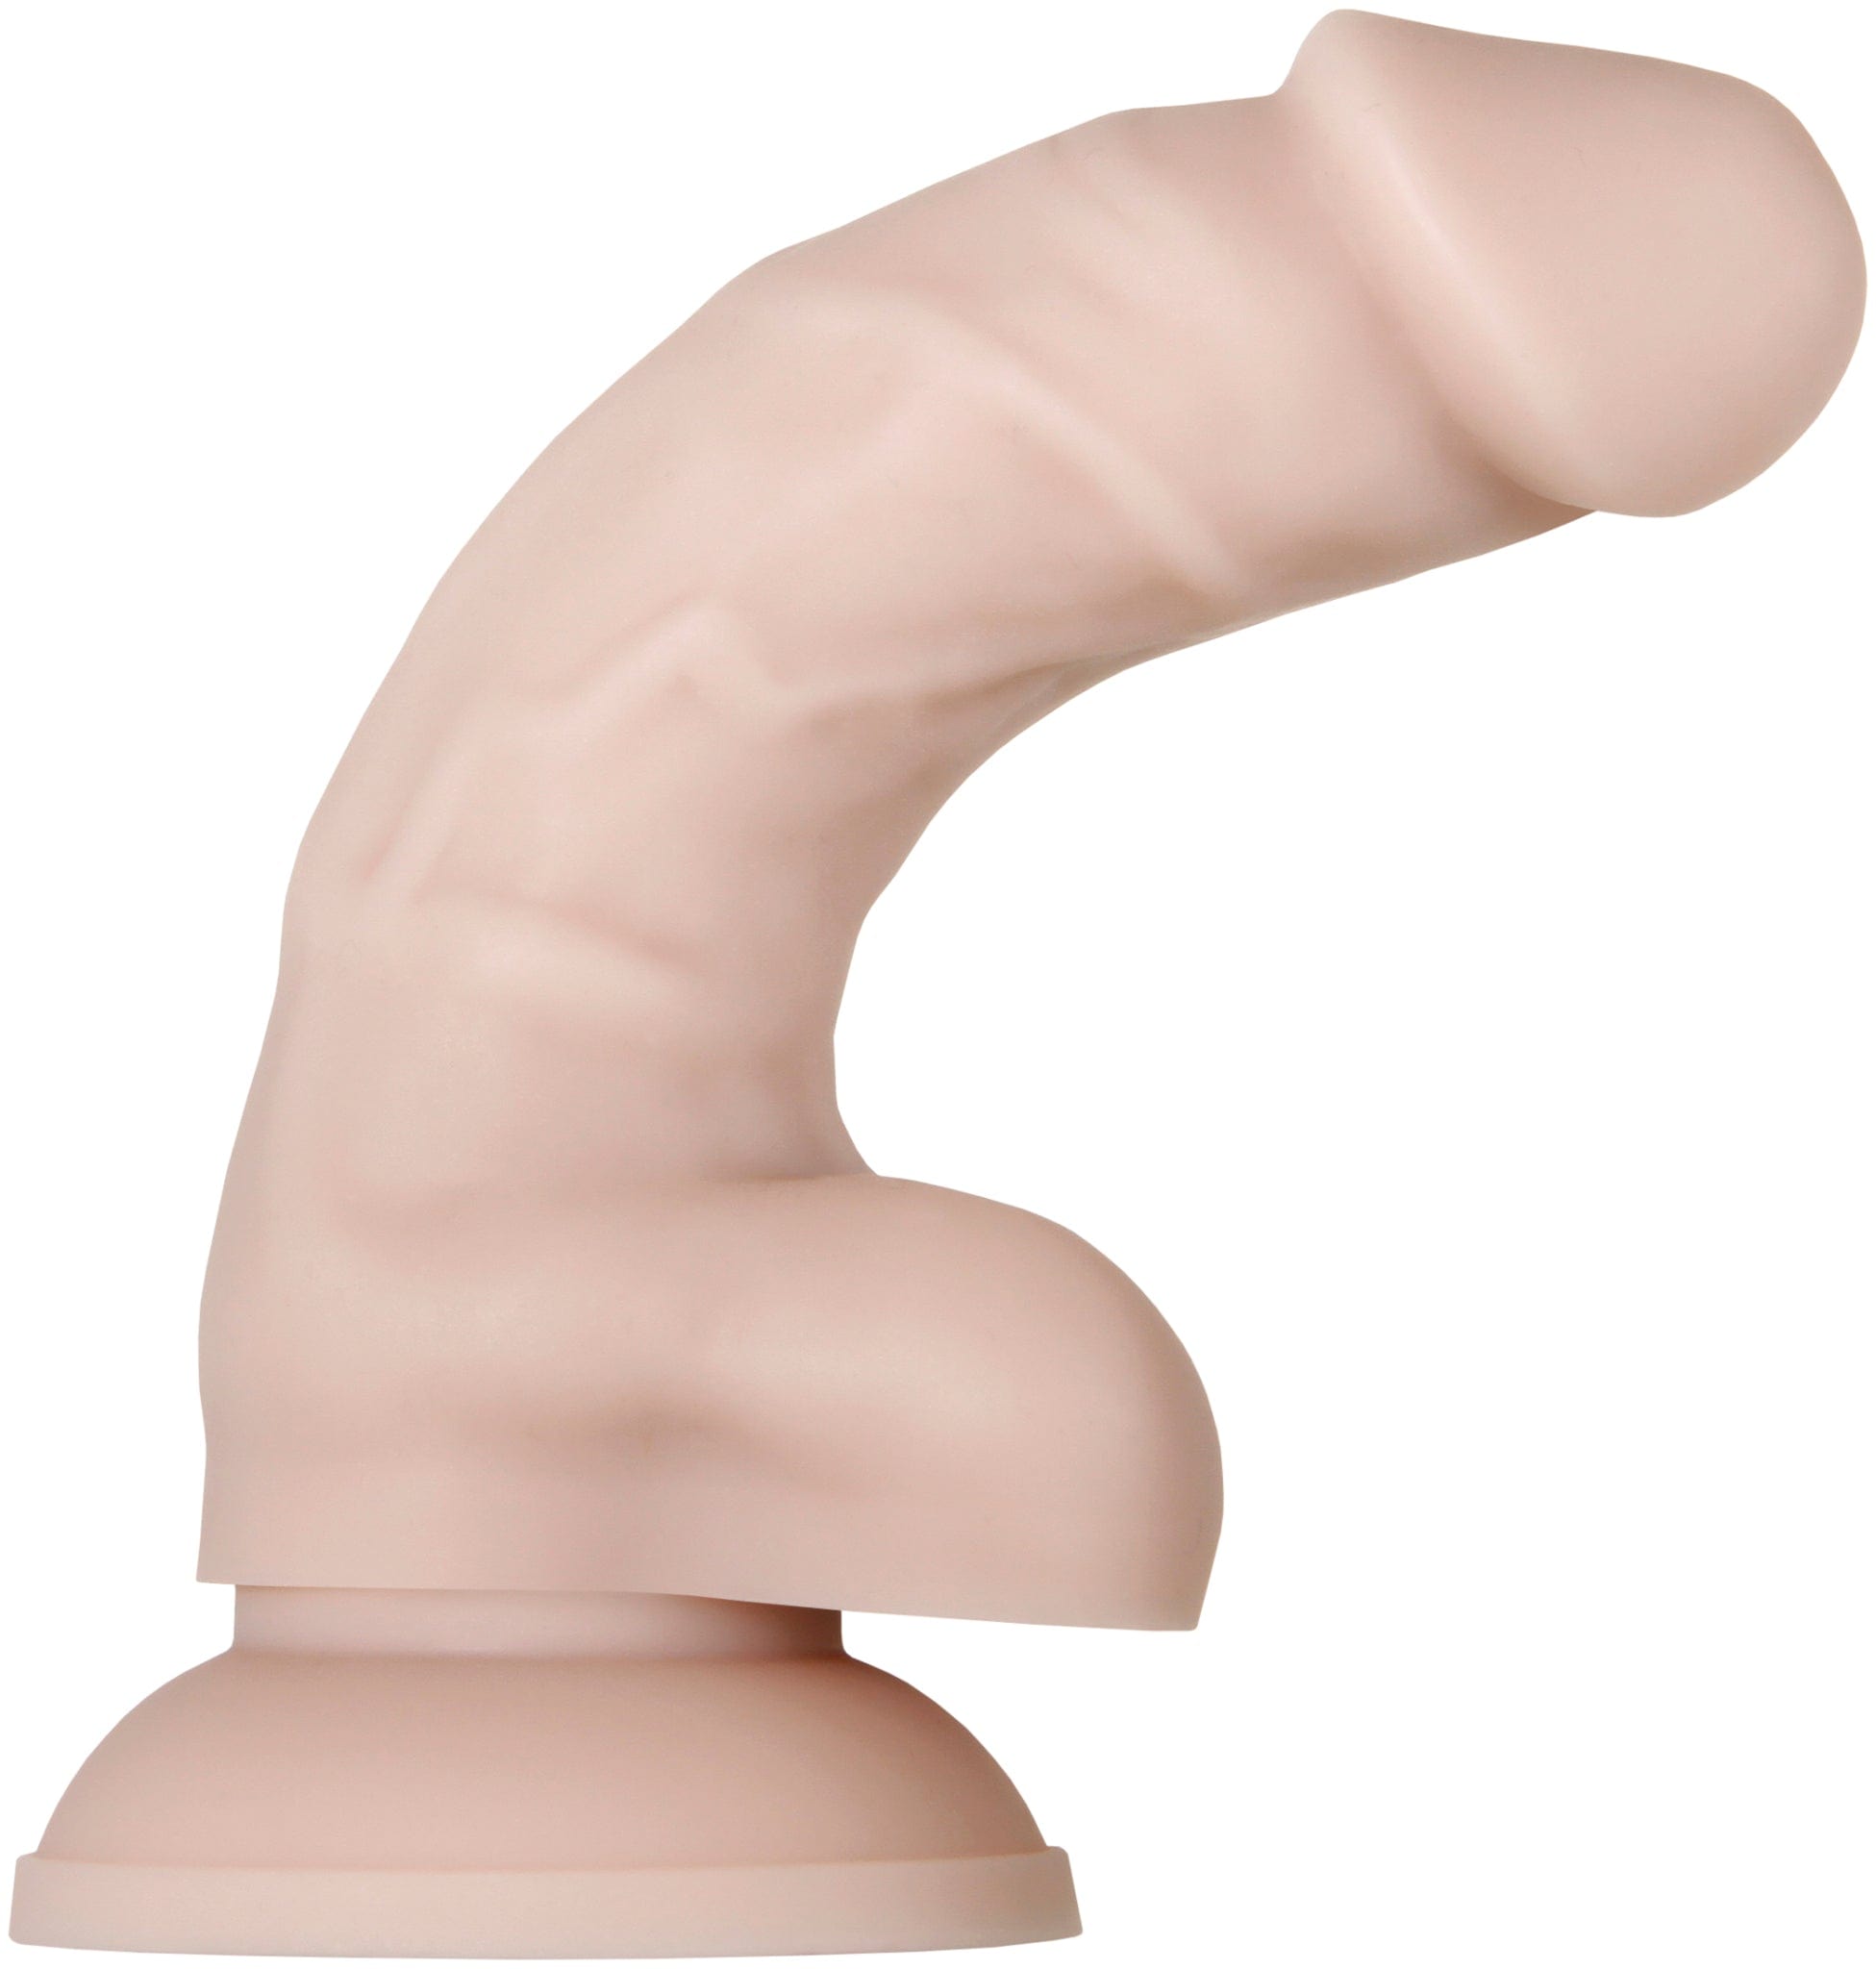 Evolved - Real Supple Silicone Posable Realistic Dildo 6" (Beige) -  Realistic Dildo with suction cup (Non Vibration)  Durio.sg